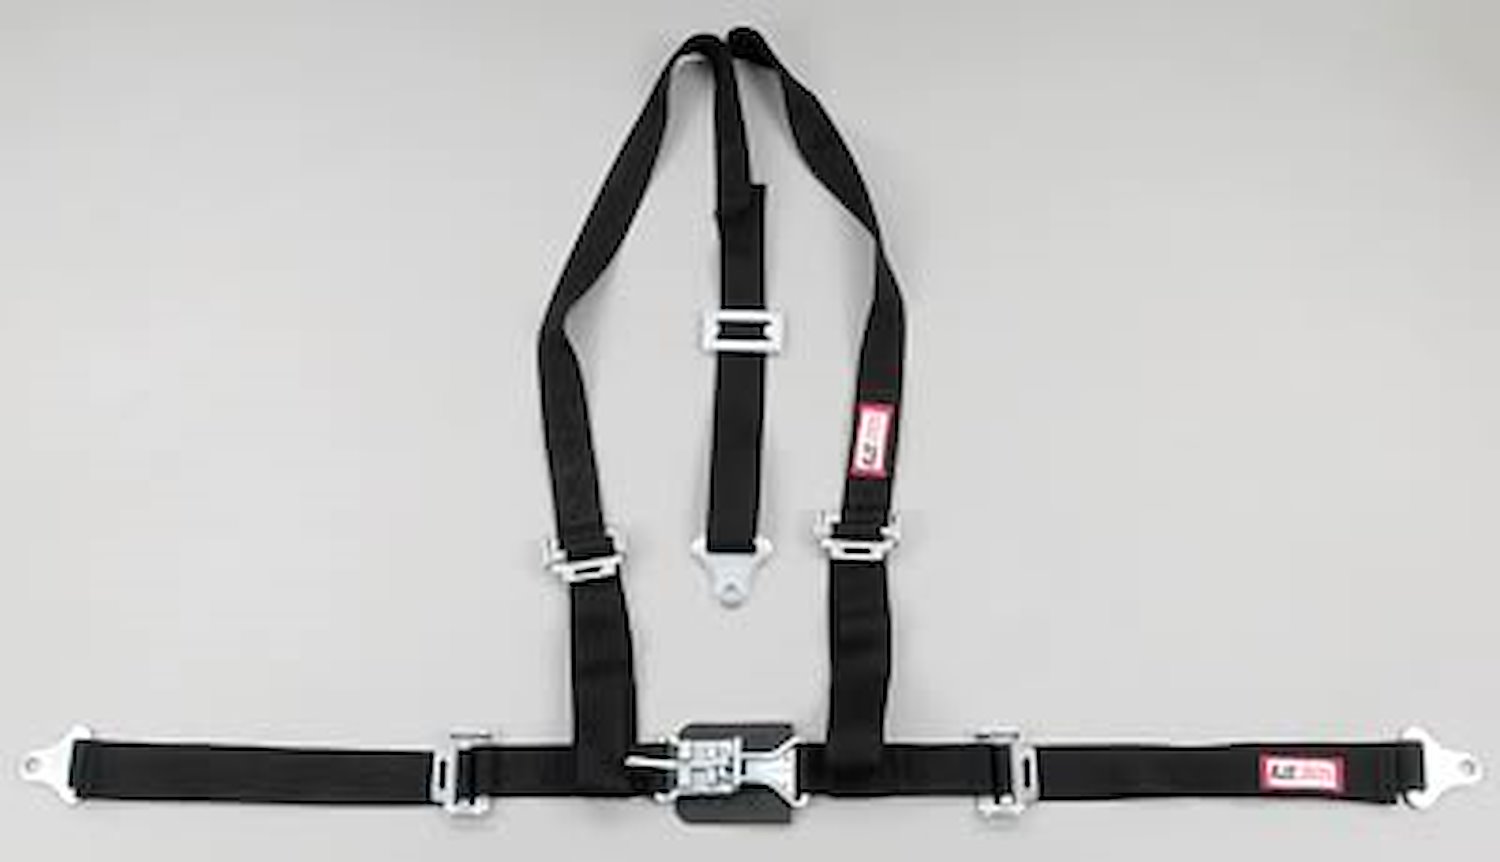 NON-SFI L&L HARNESS 3 PULL DOWN Lap Belt w/adjuster 2 S.H. Individual FLOOR Mount w/STERNUM STRAP ALL WRAP ENDS RED